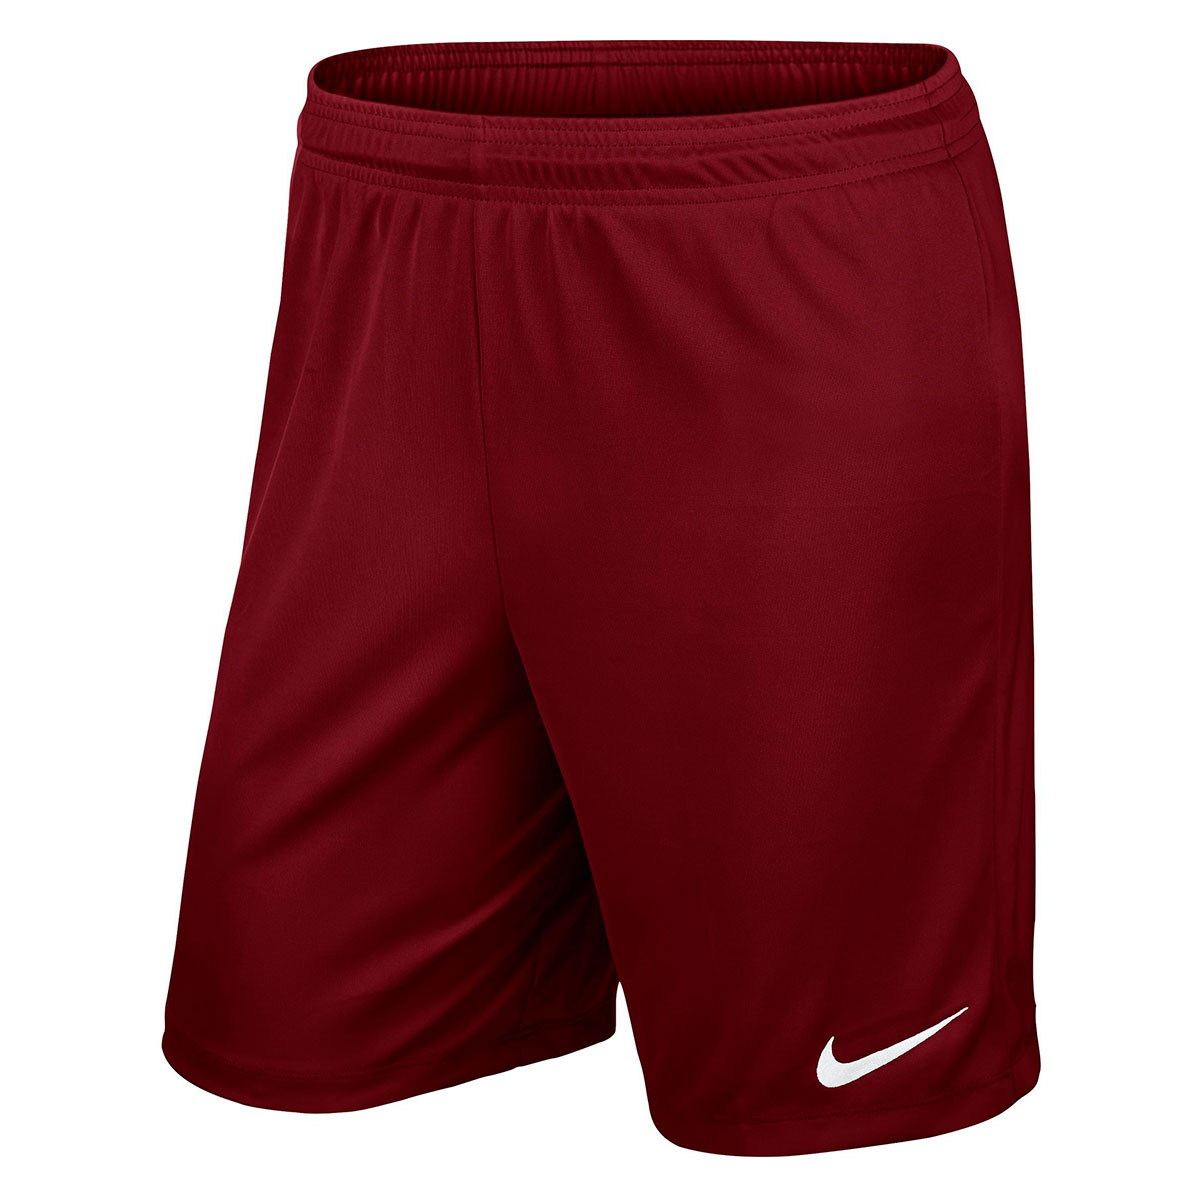 Shorts Nike Park II Knit Team red-White 